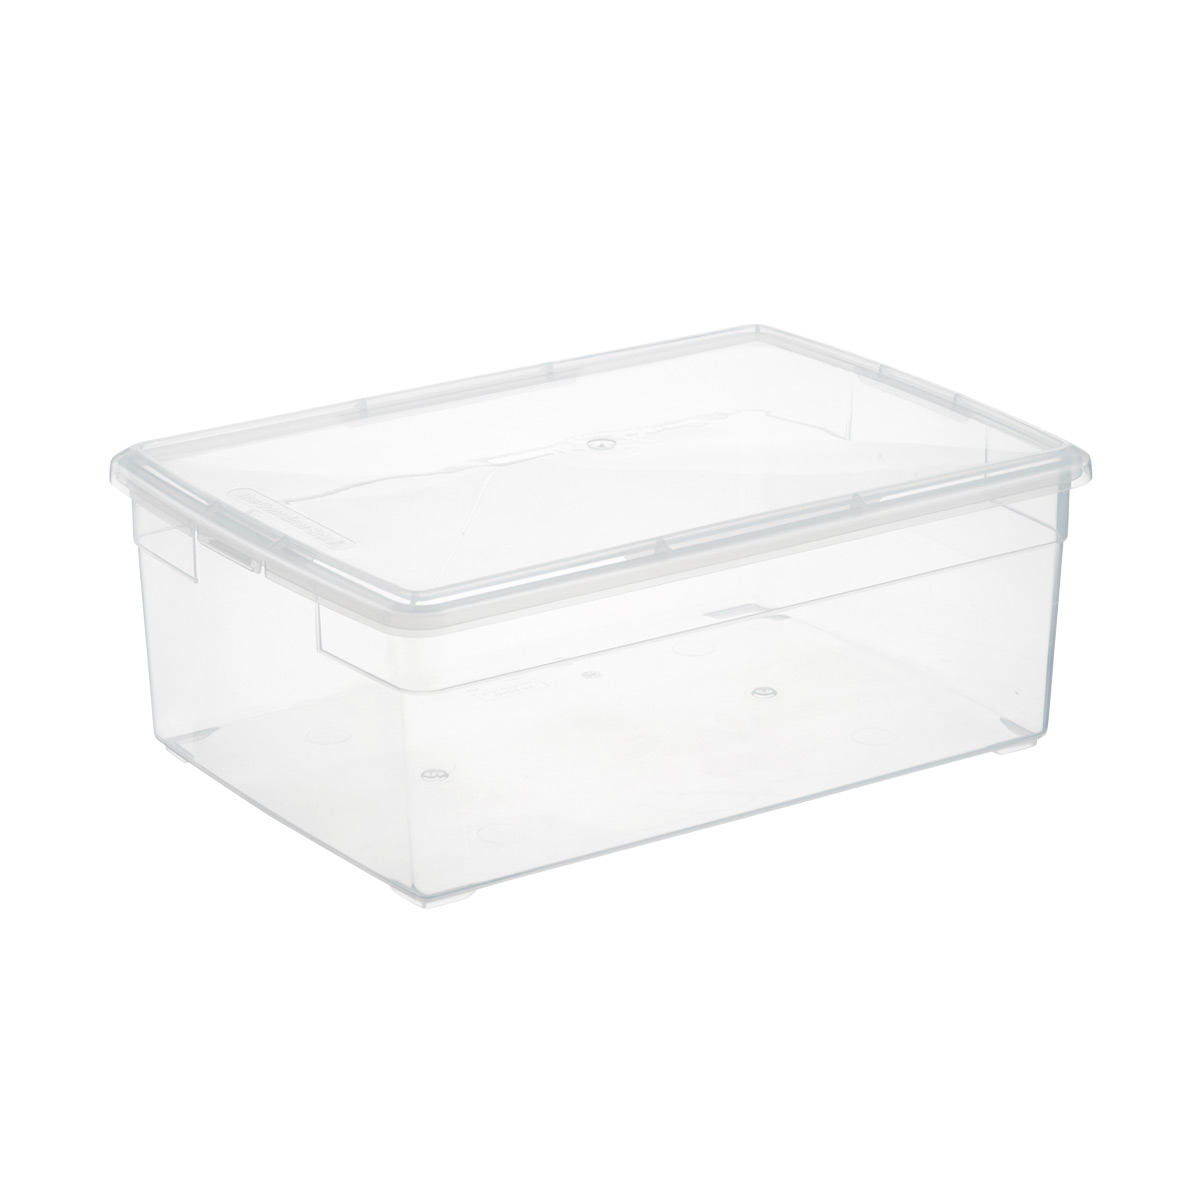 10 X 3L REALLY USEFUL STORAGE BOXES IN CLEAR PLASTIC WITH LID BOX 